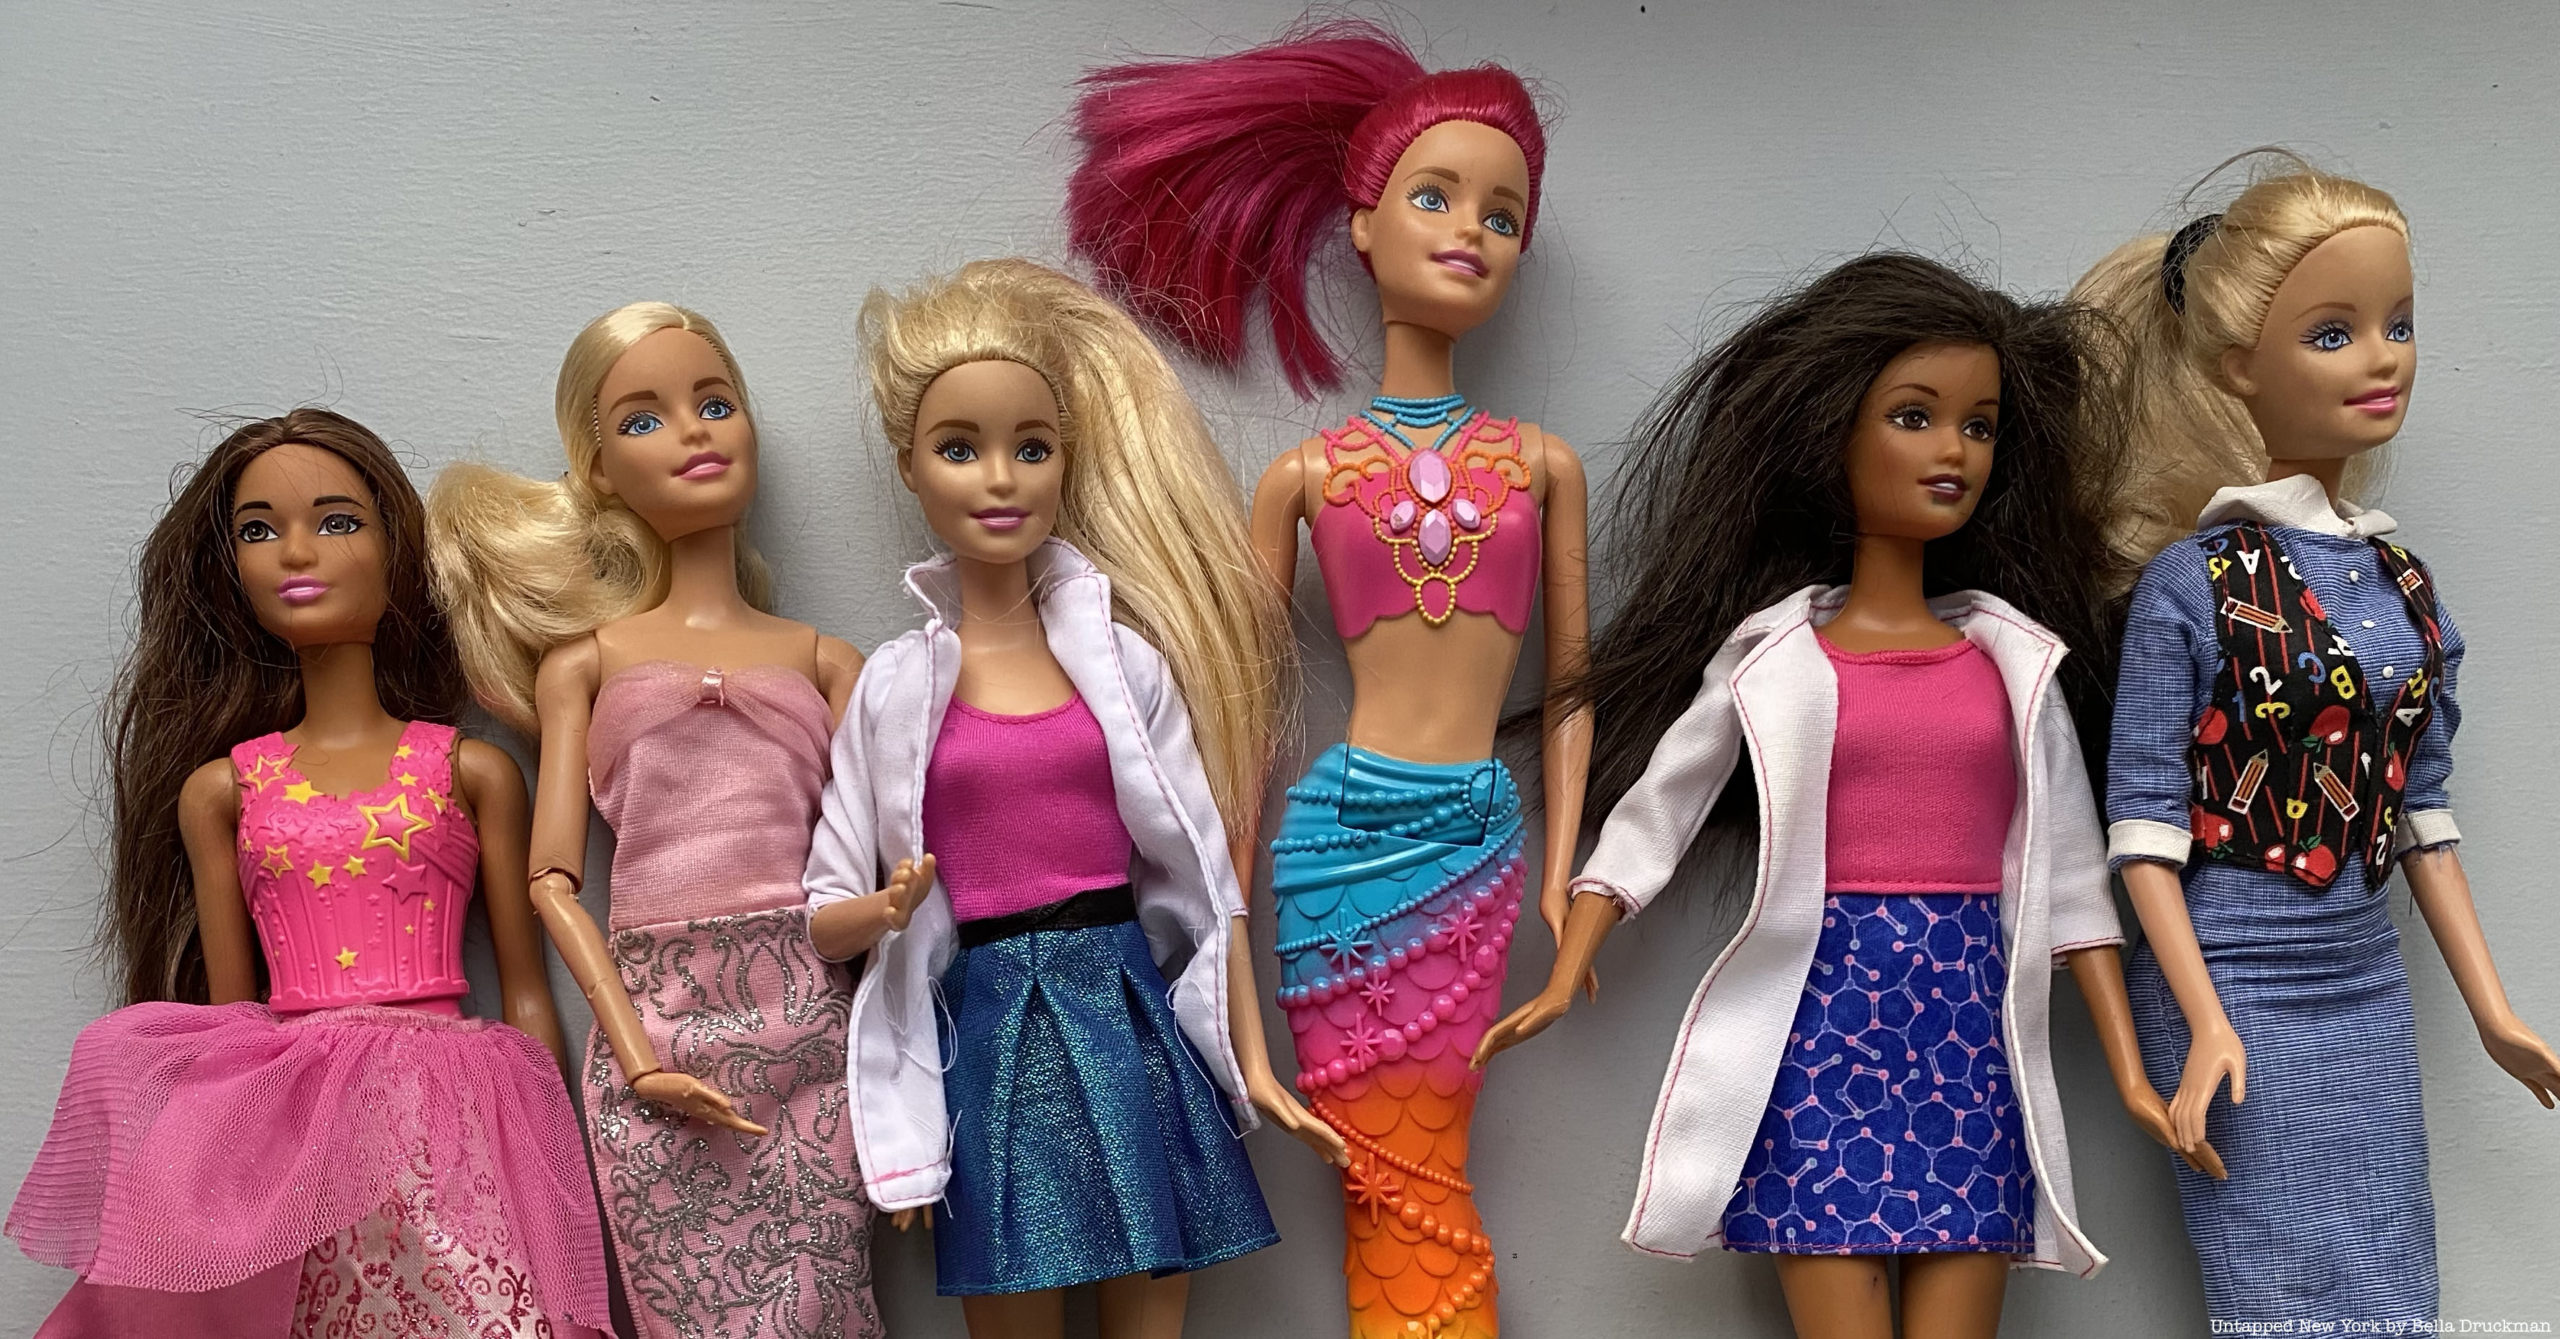 Line of Barbies extend past Barbie in New York.